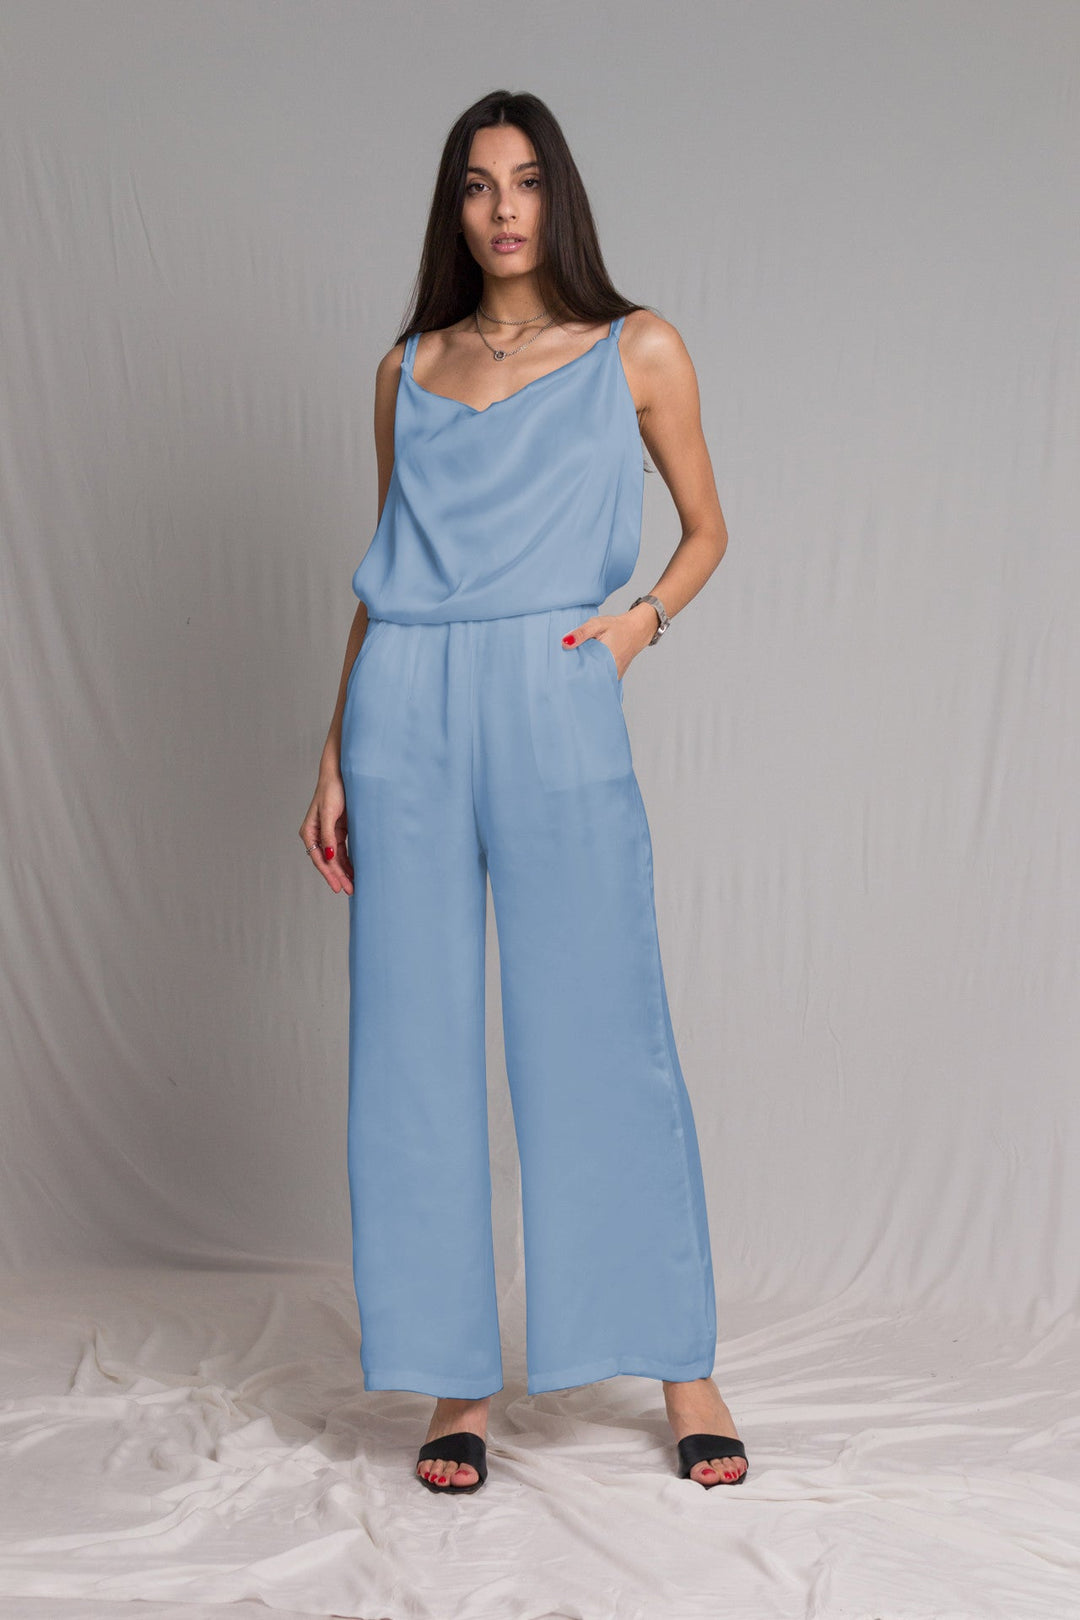 Baby blue satin jumpsuit with a cowl neckline thin straps and a risque low back